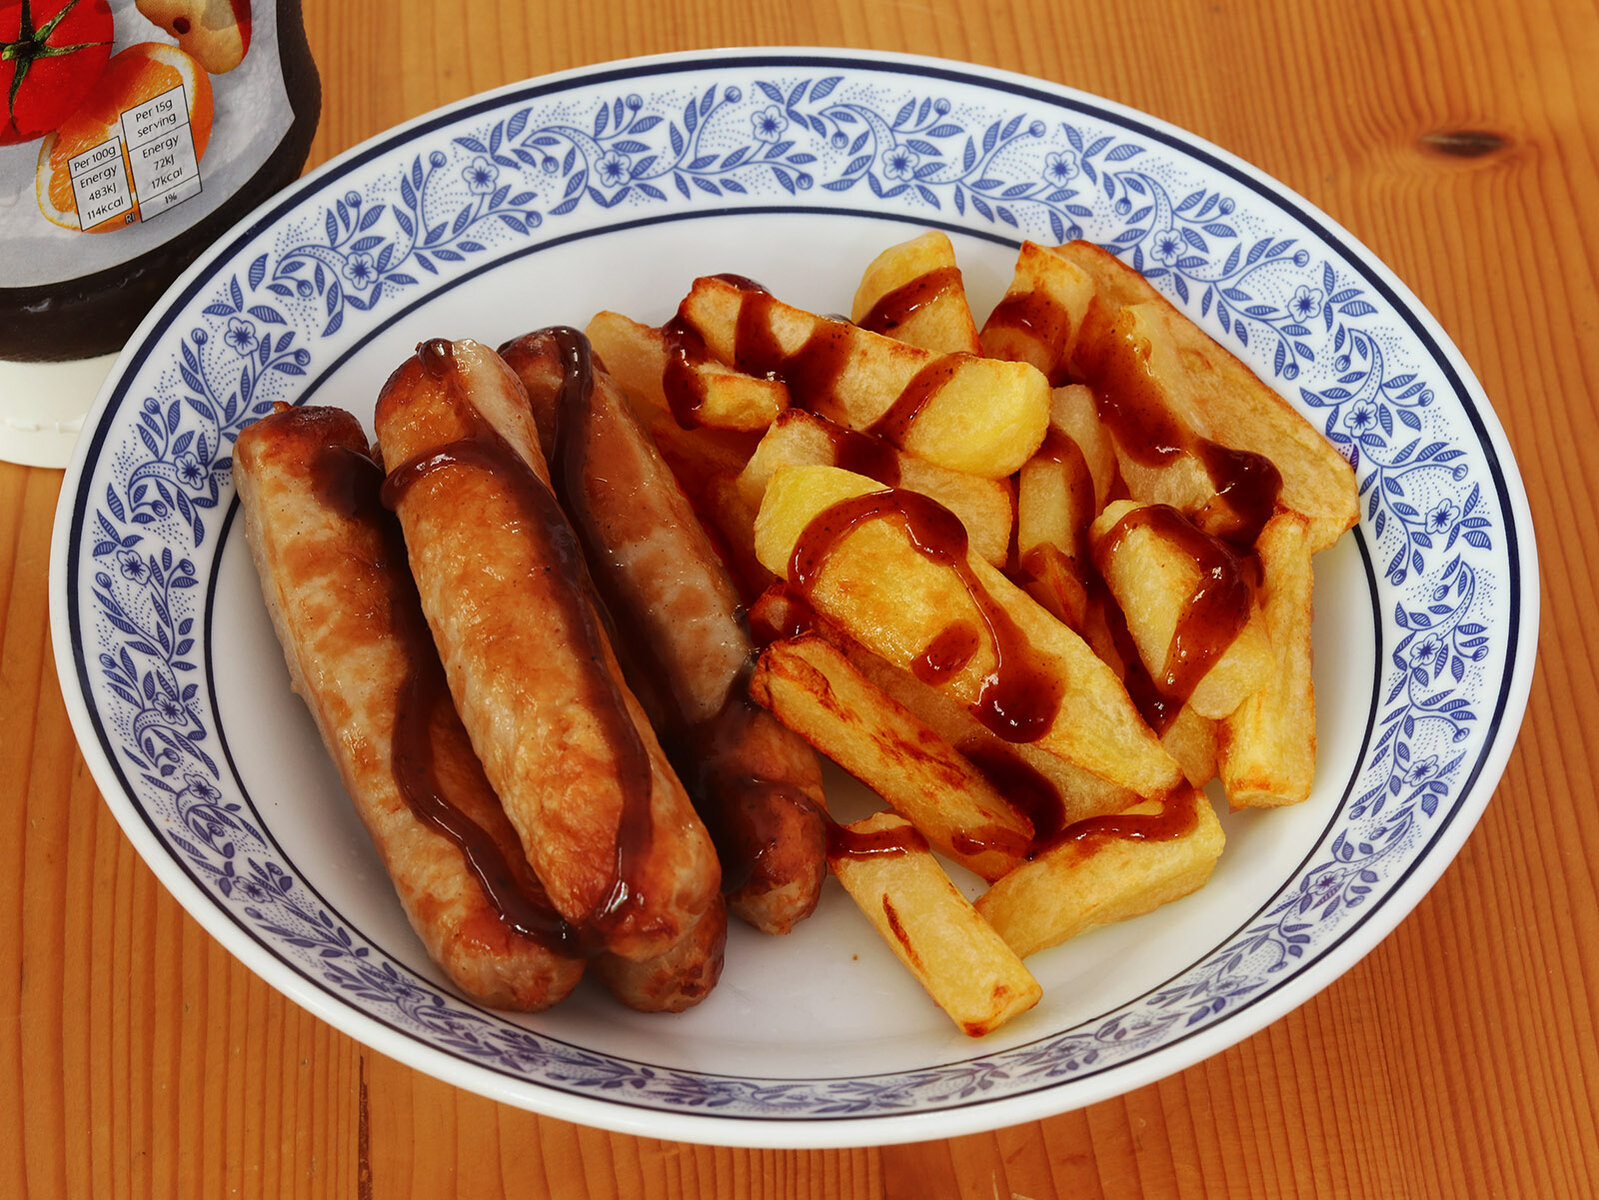 Sausages and chips s.jpg